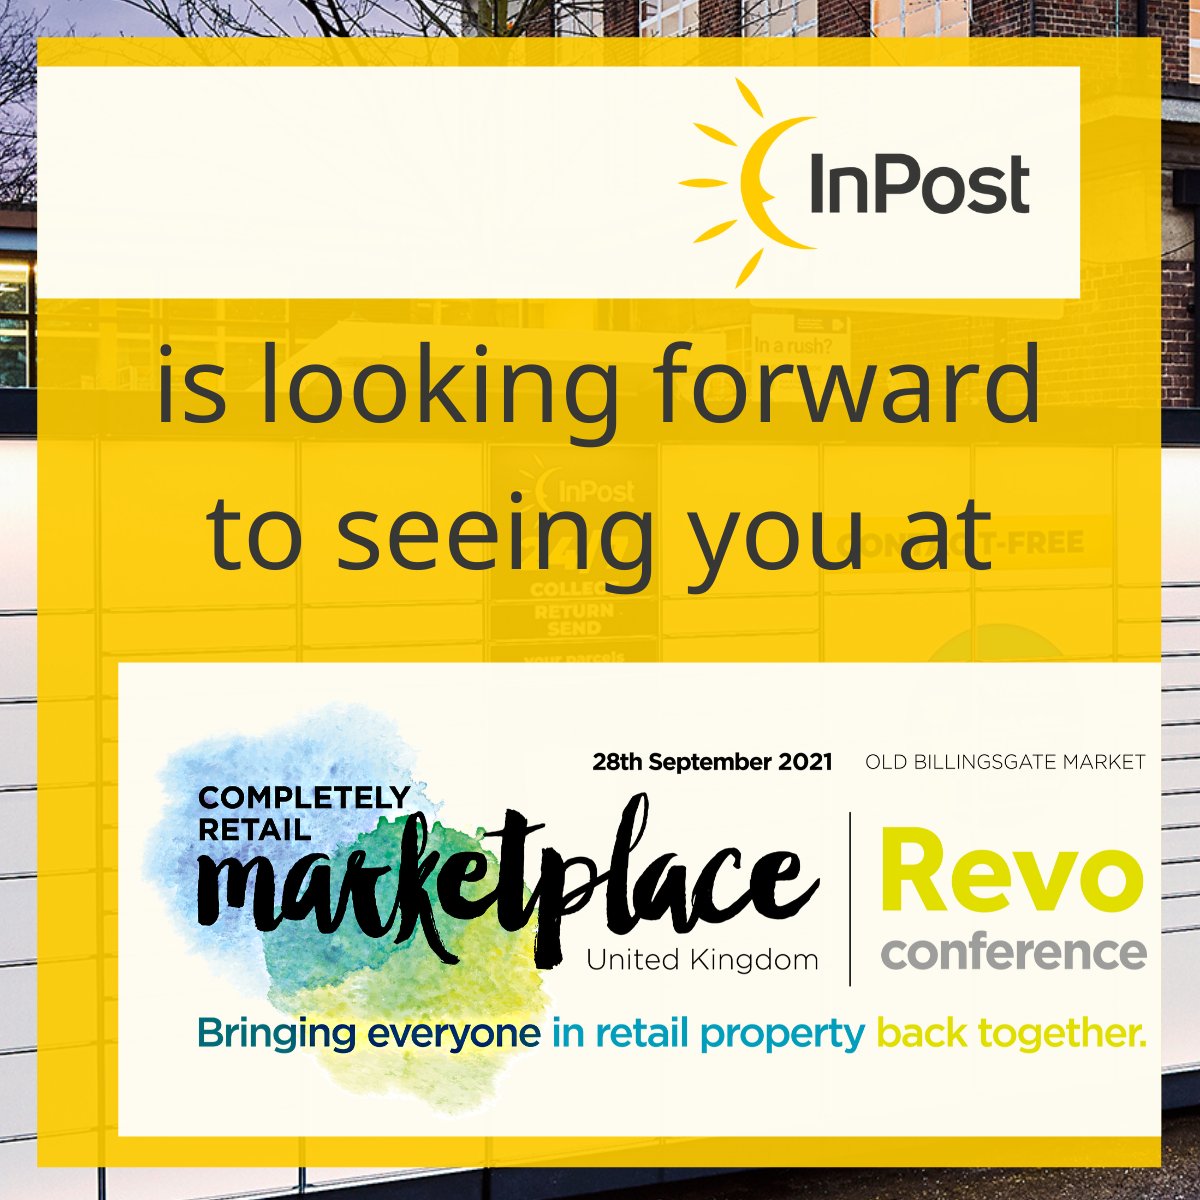 We're at @RevoLatest #CRMPUK on 28 September. Want to know how #parcellockers can help build #Greenercommunities ? Come talk to us! #CRE #Commercialrealestate